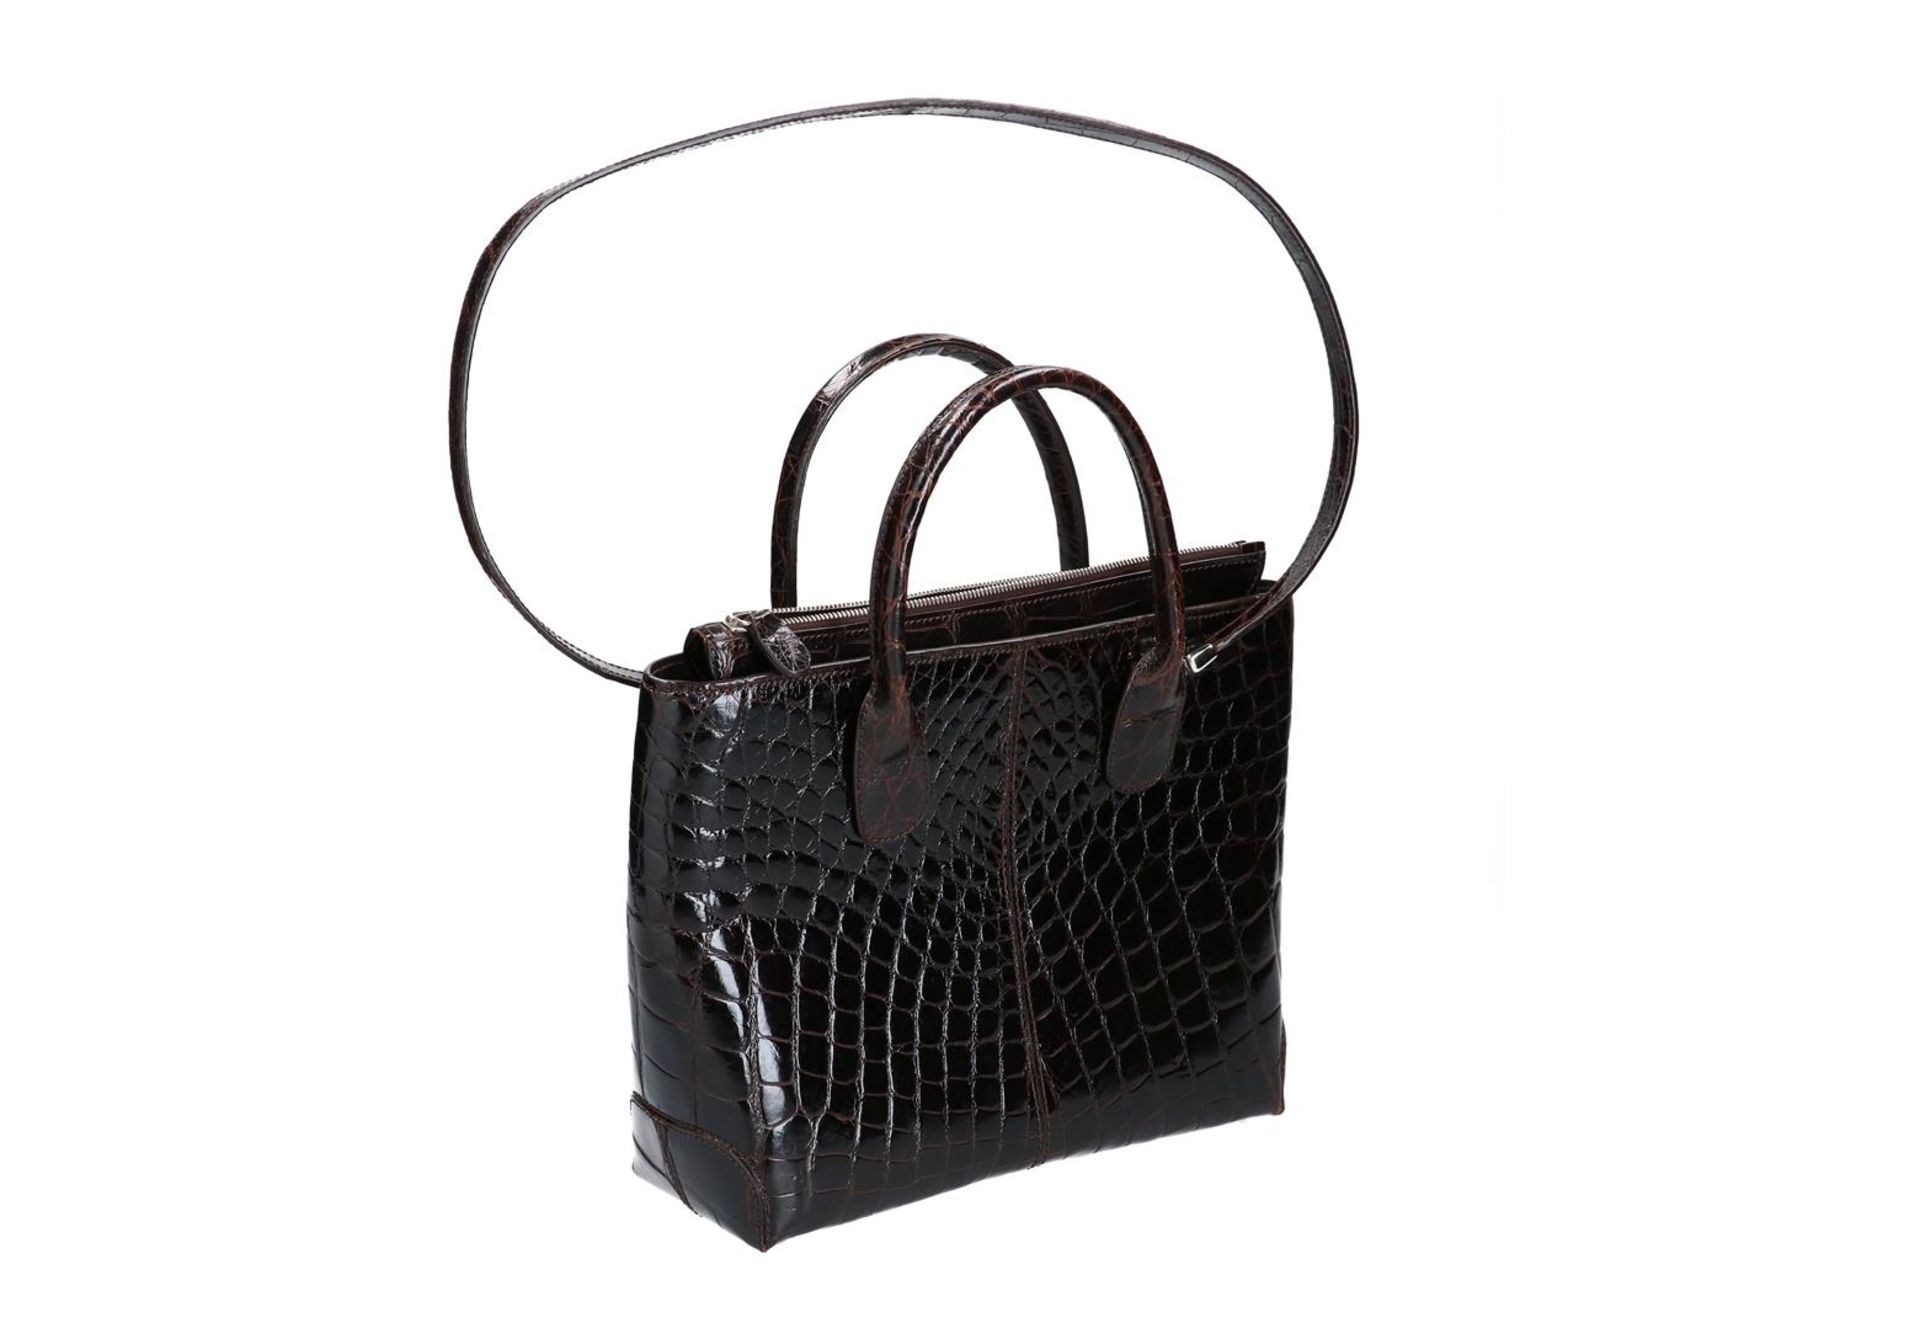 Tods, brown crocodile pattern leather handbag with shoulder strap. H x W x D: 25 x 33 x 10 cm. - Image 4 of 5